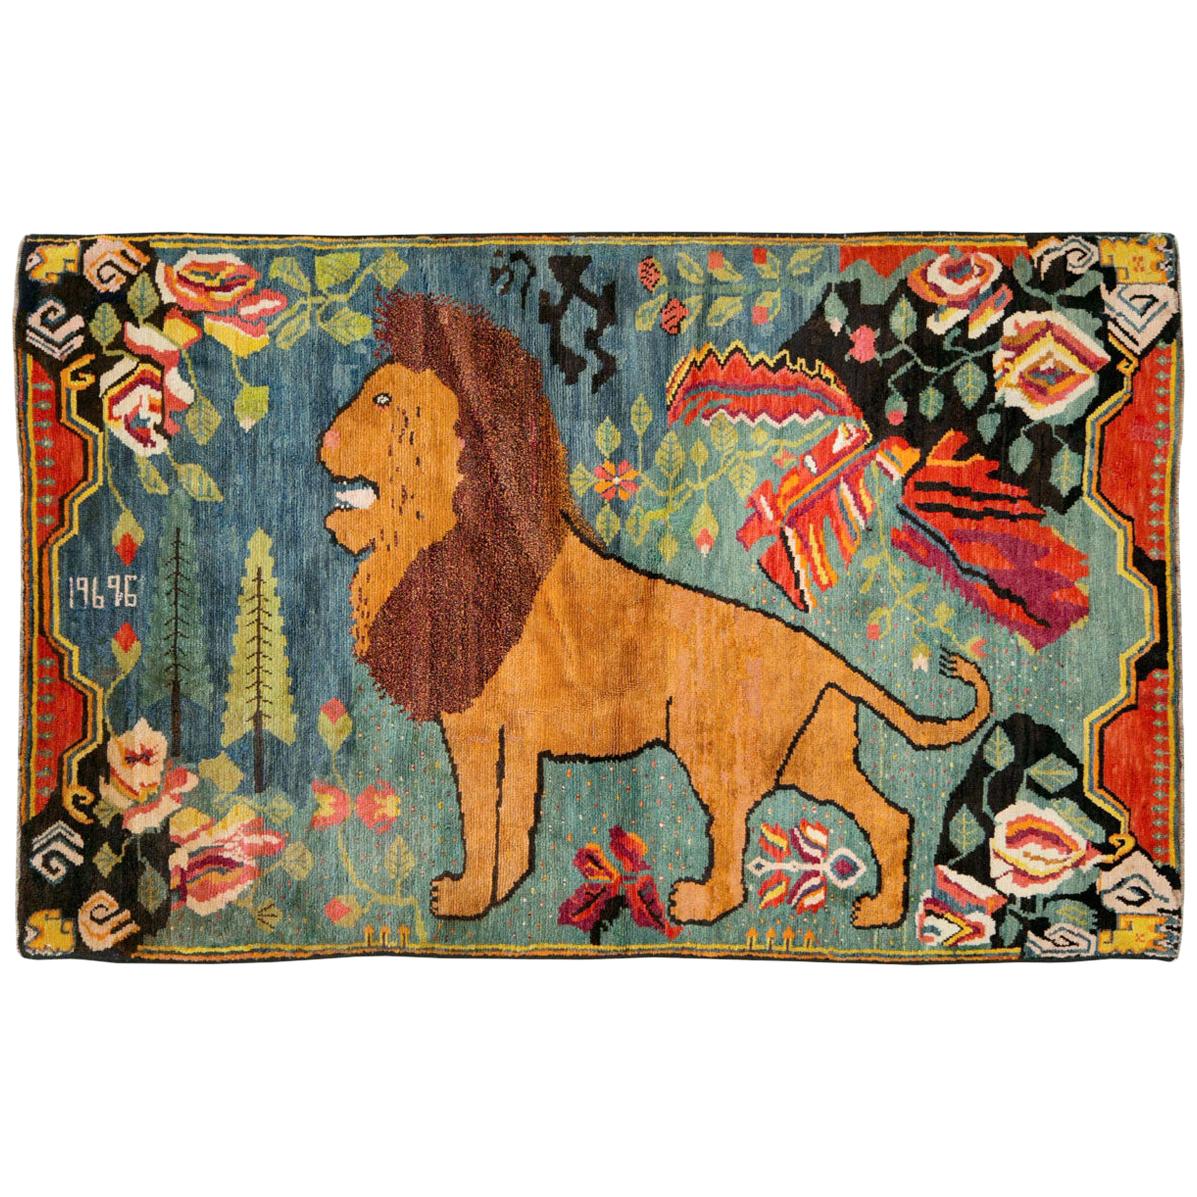 Midcentury Handmade Pictorial Lion Rug in Cerulean Blue and Seafoam Green